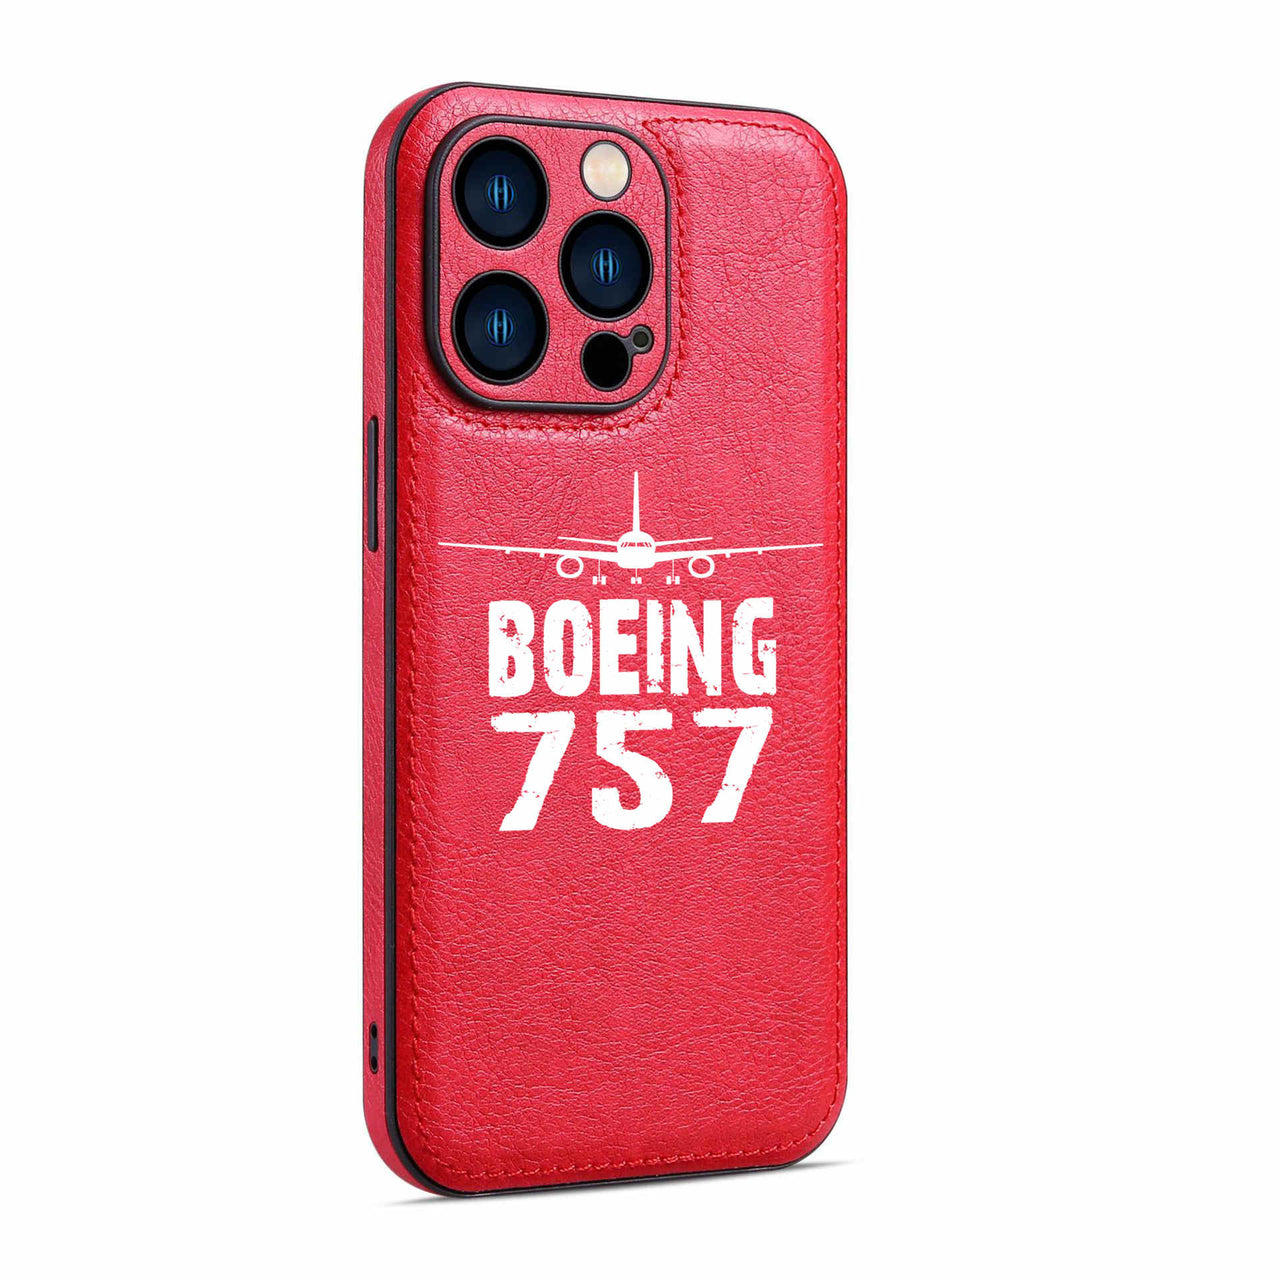 Boeing 757 & Plane Designed Leather iPhone Cases